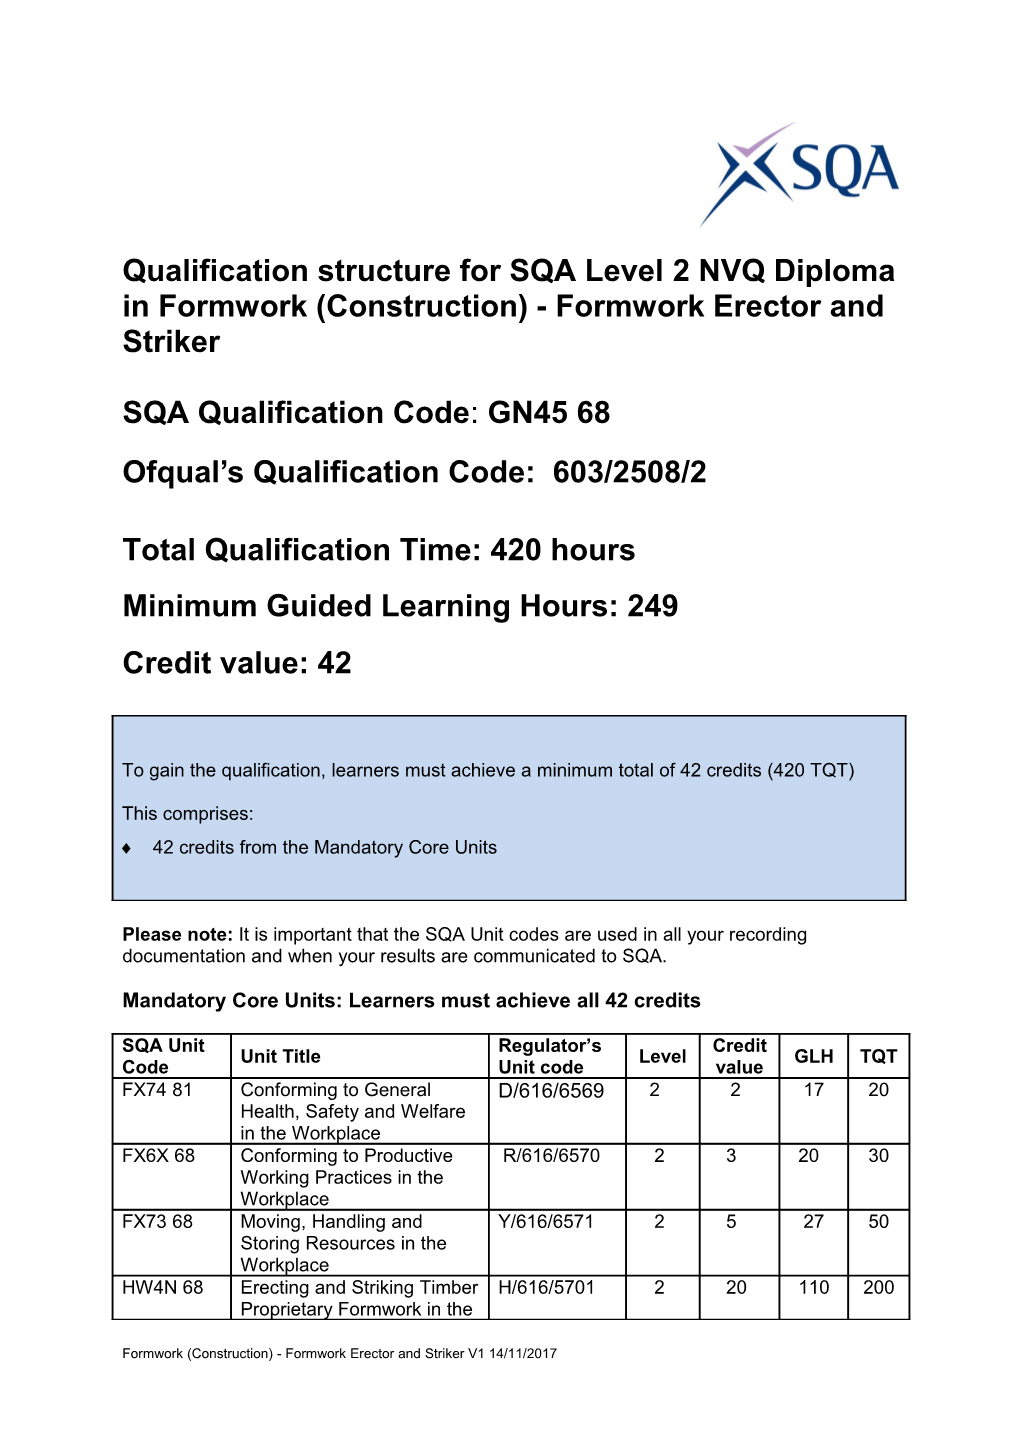 Qualification Structure for SQA Level 2 NVQ Diploma in Formwork (Construction) - Formwork